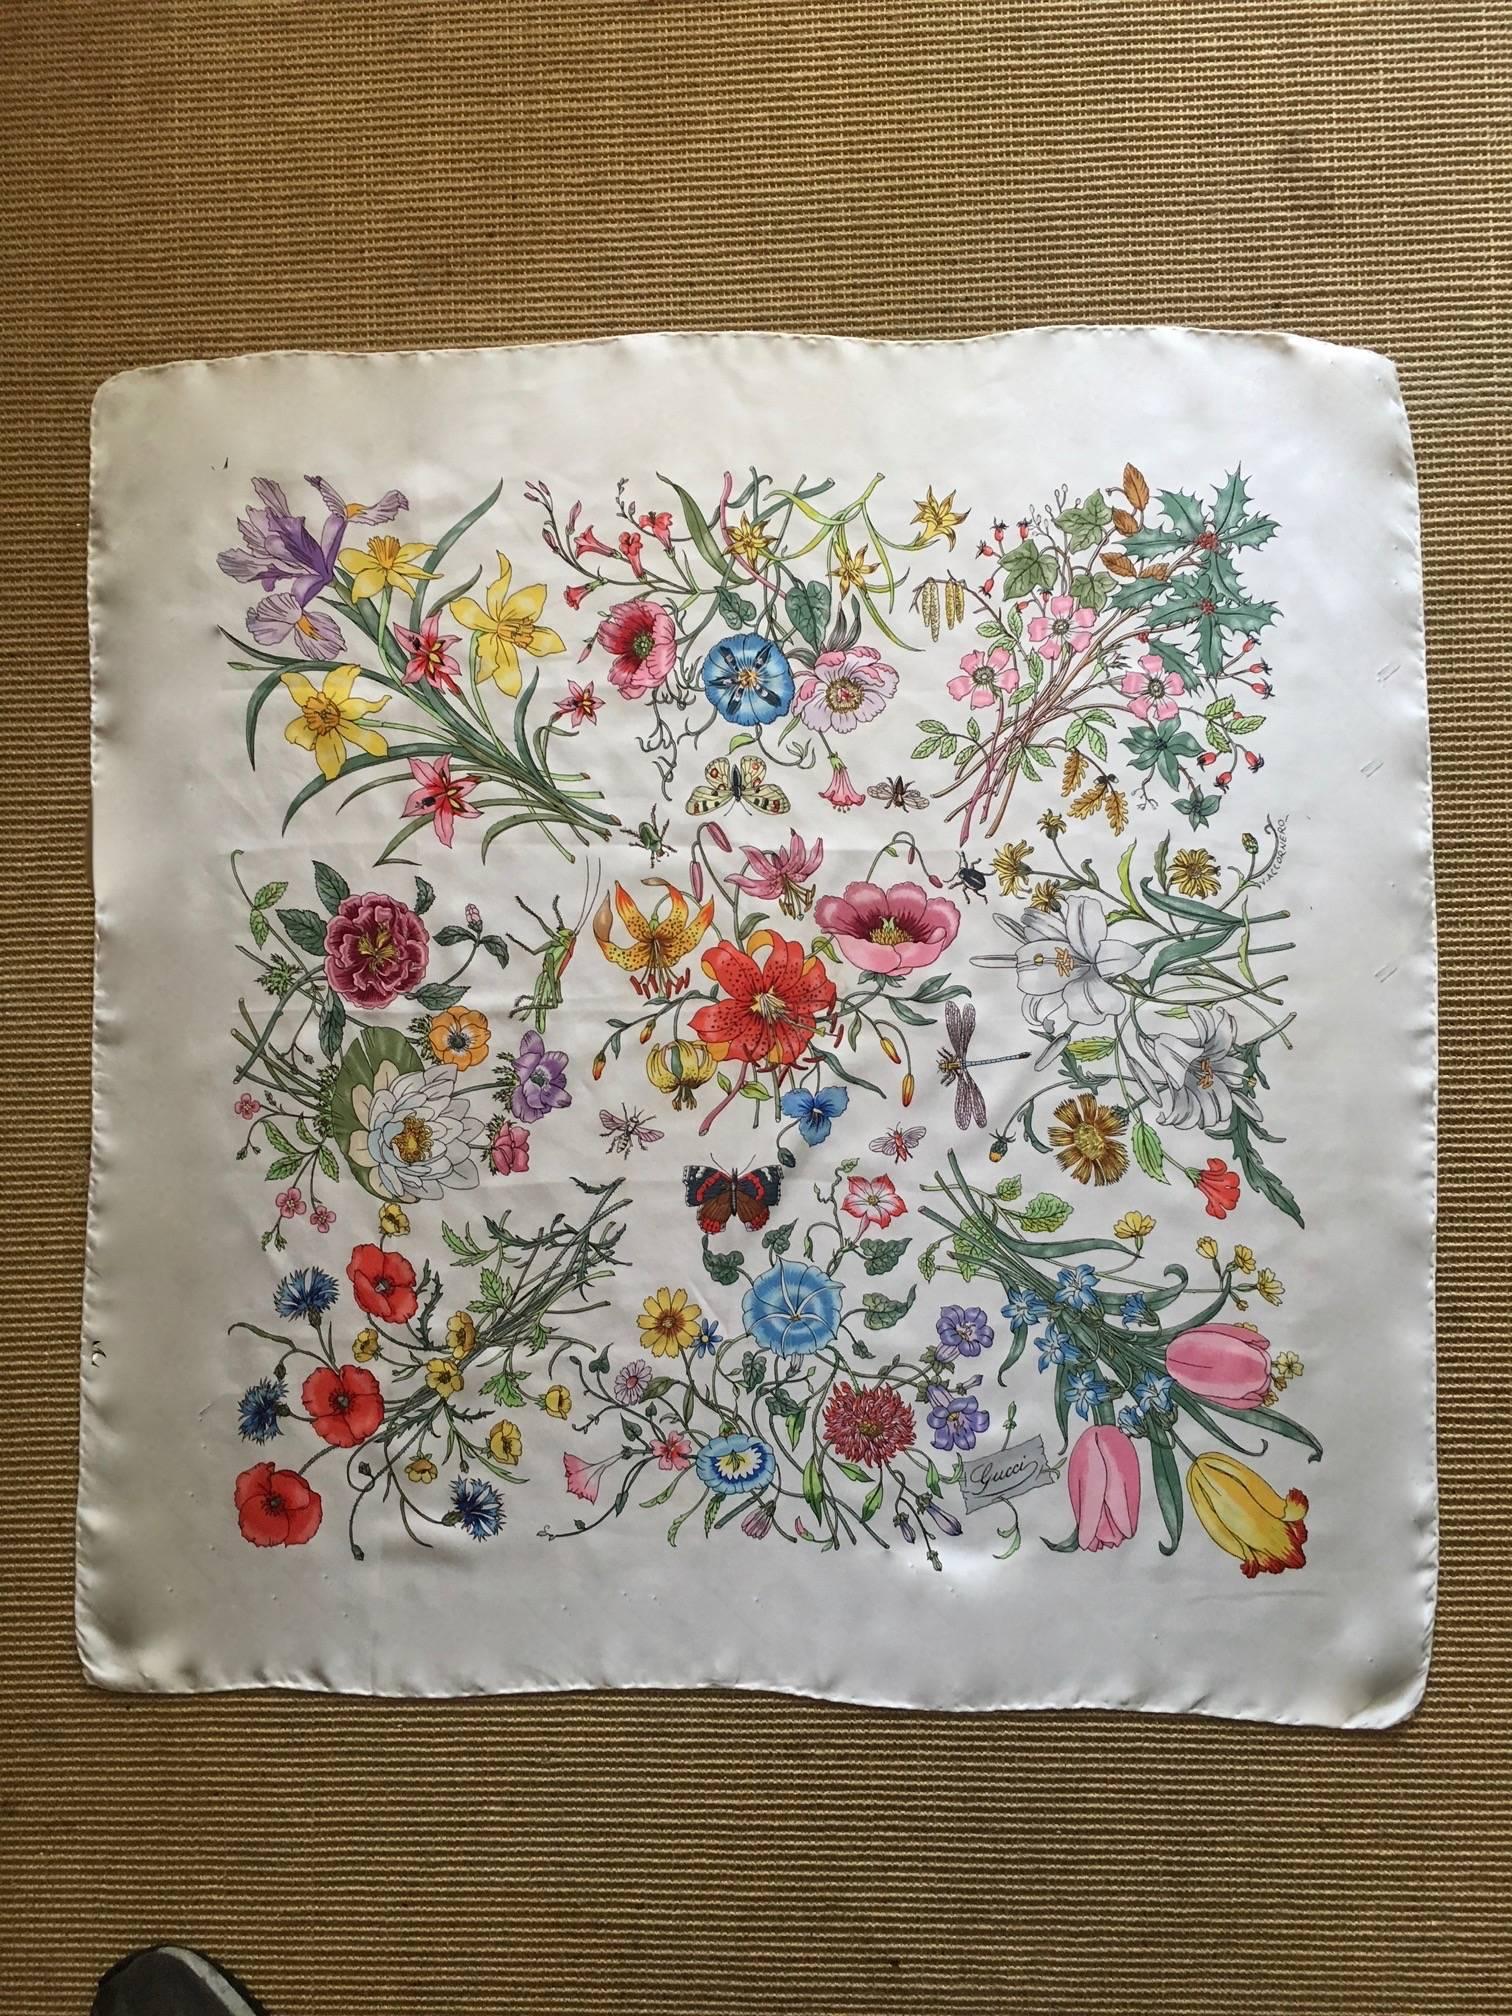 Vintage Gucci Floral Silk Scarf In Excellent Condition For Sale In Los Angeles, CA